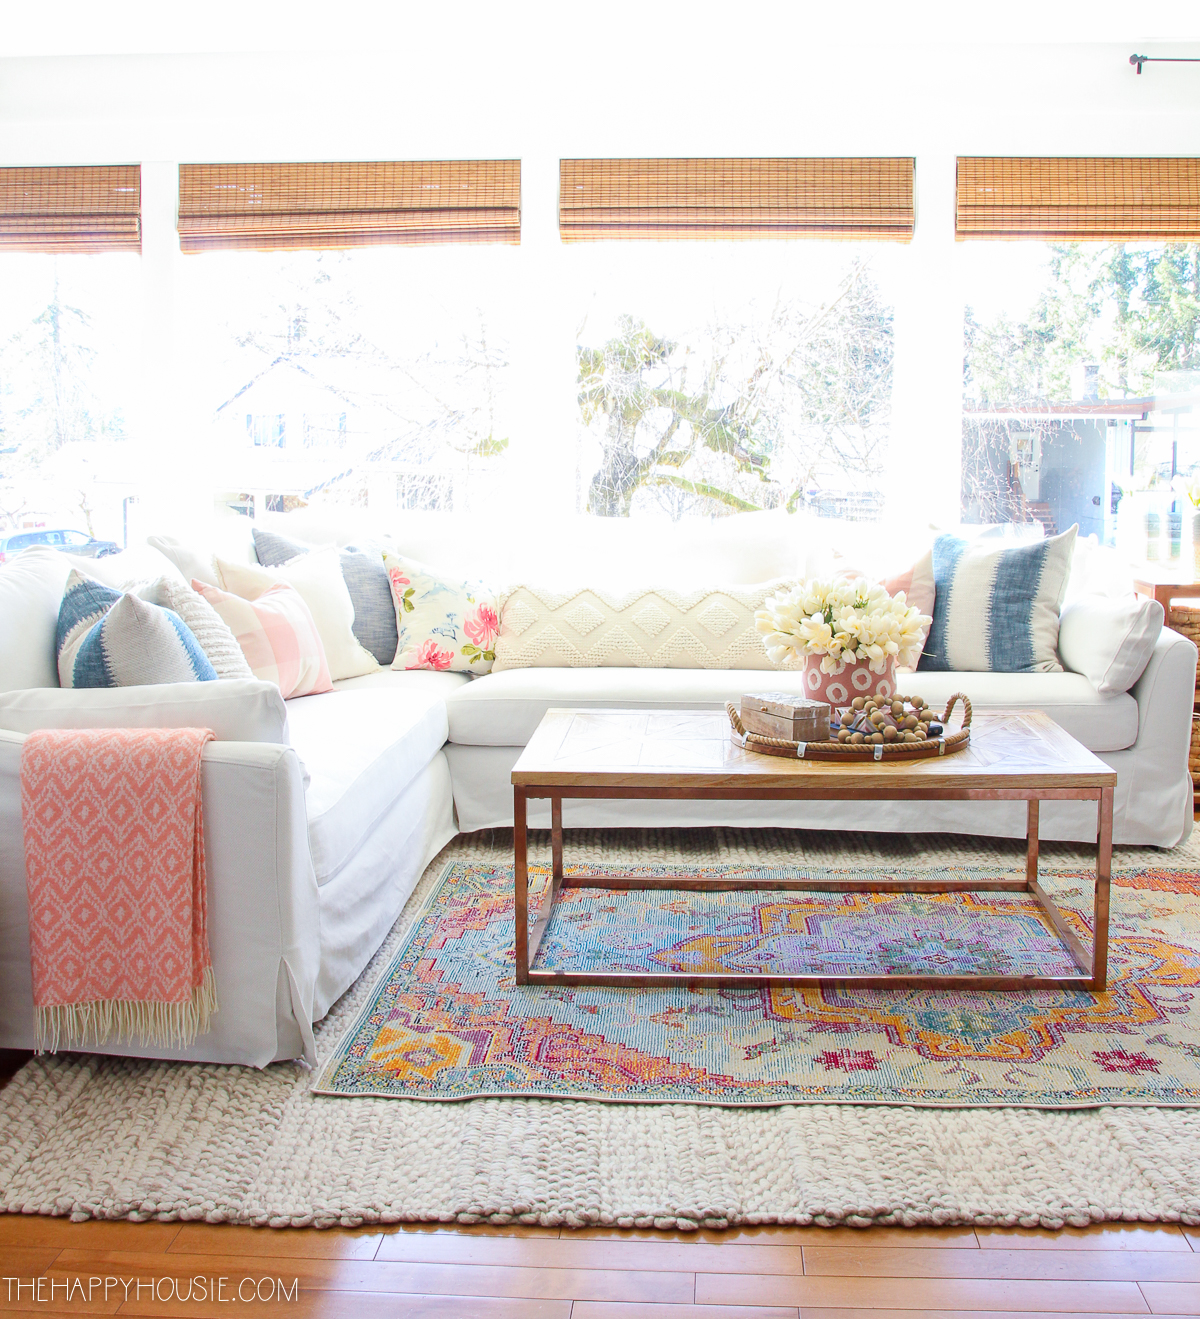 A white rug is in the living room.